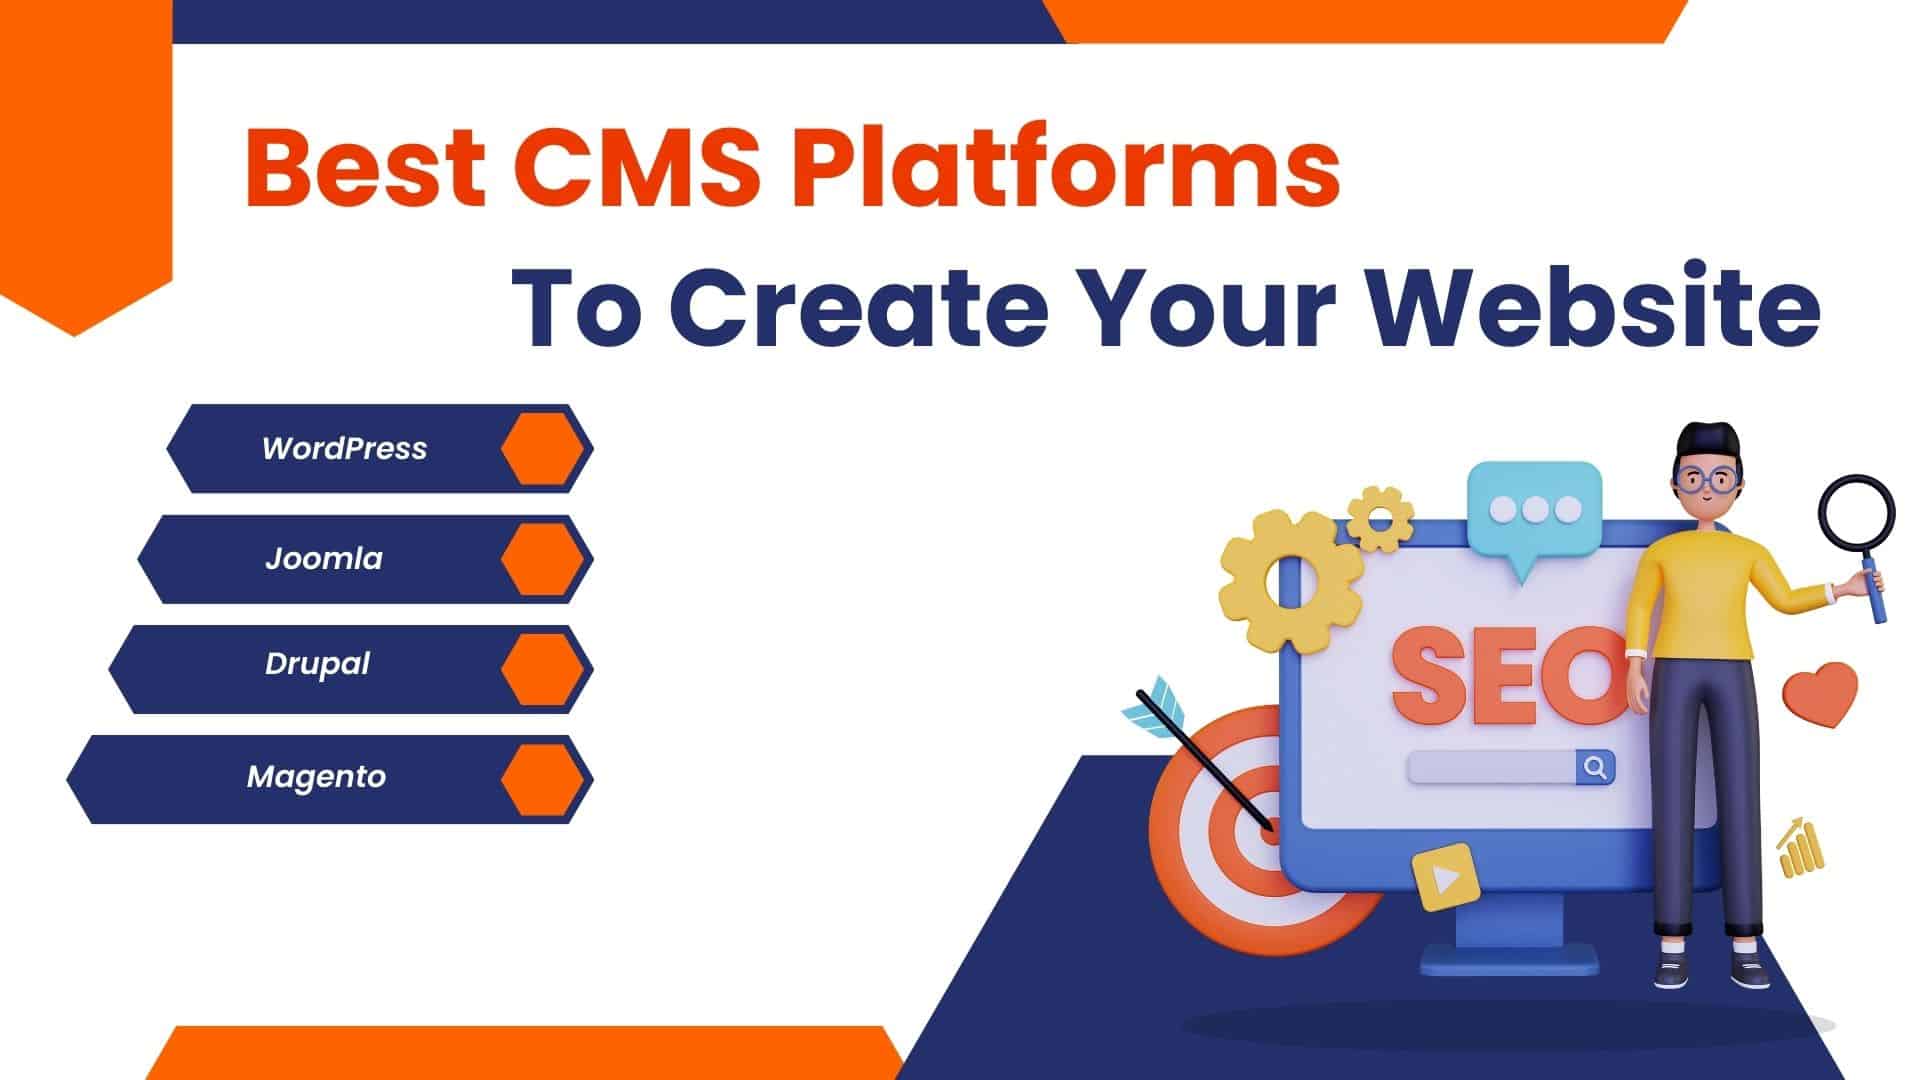 Best CMS Platforms to Create Your Website